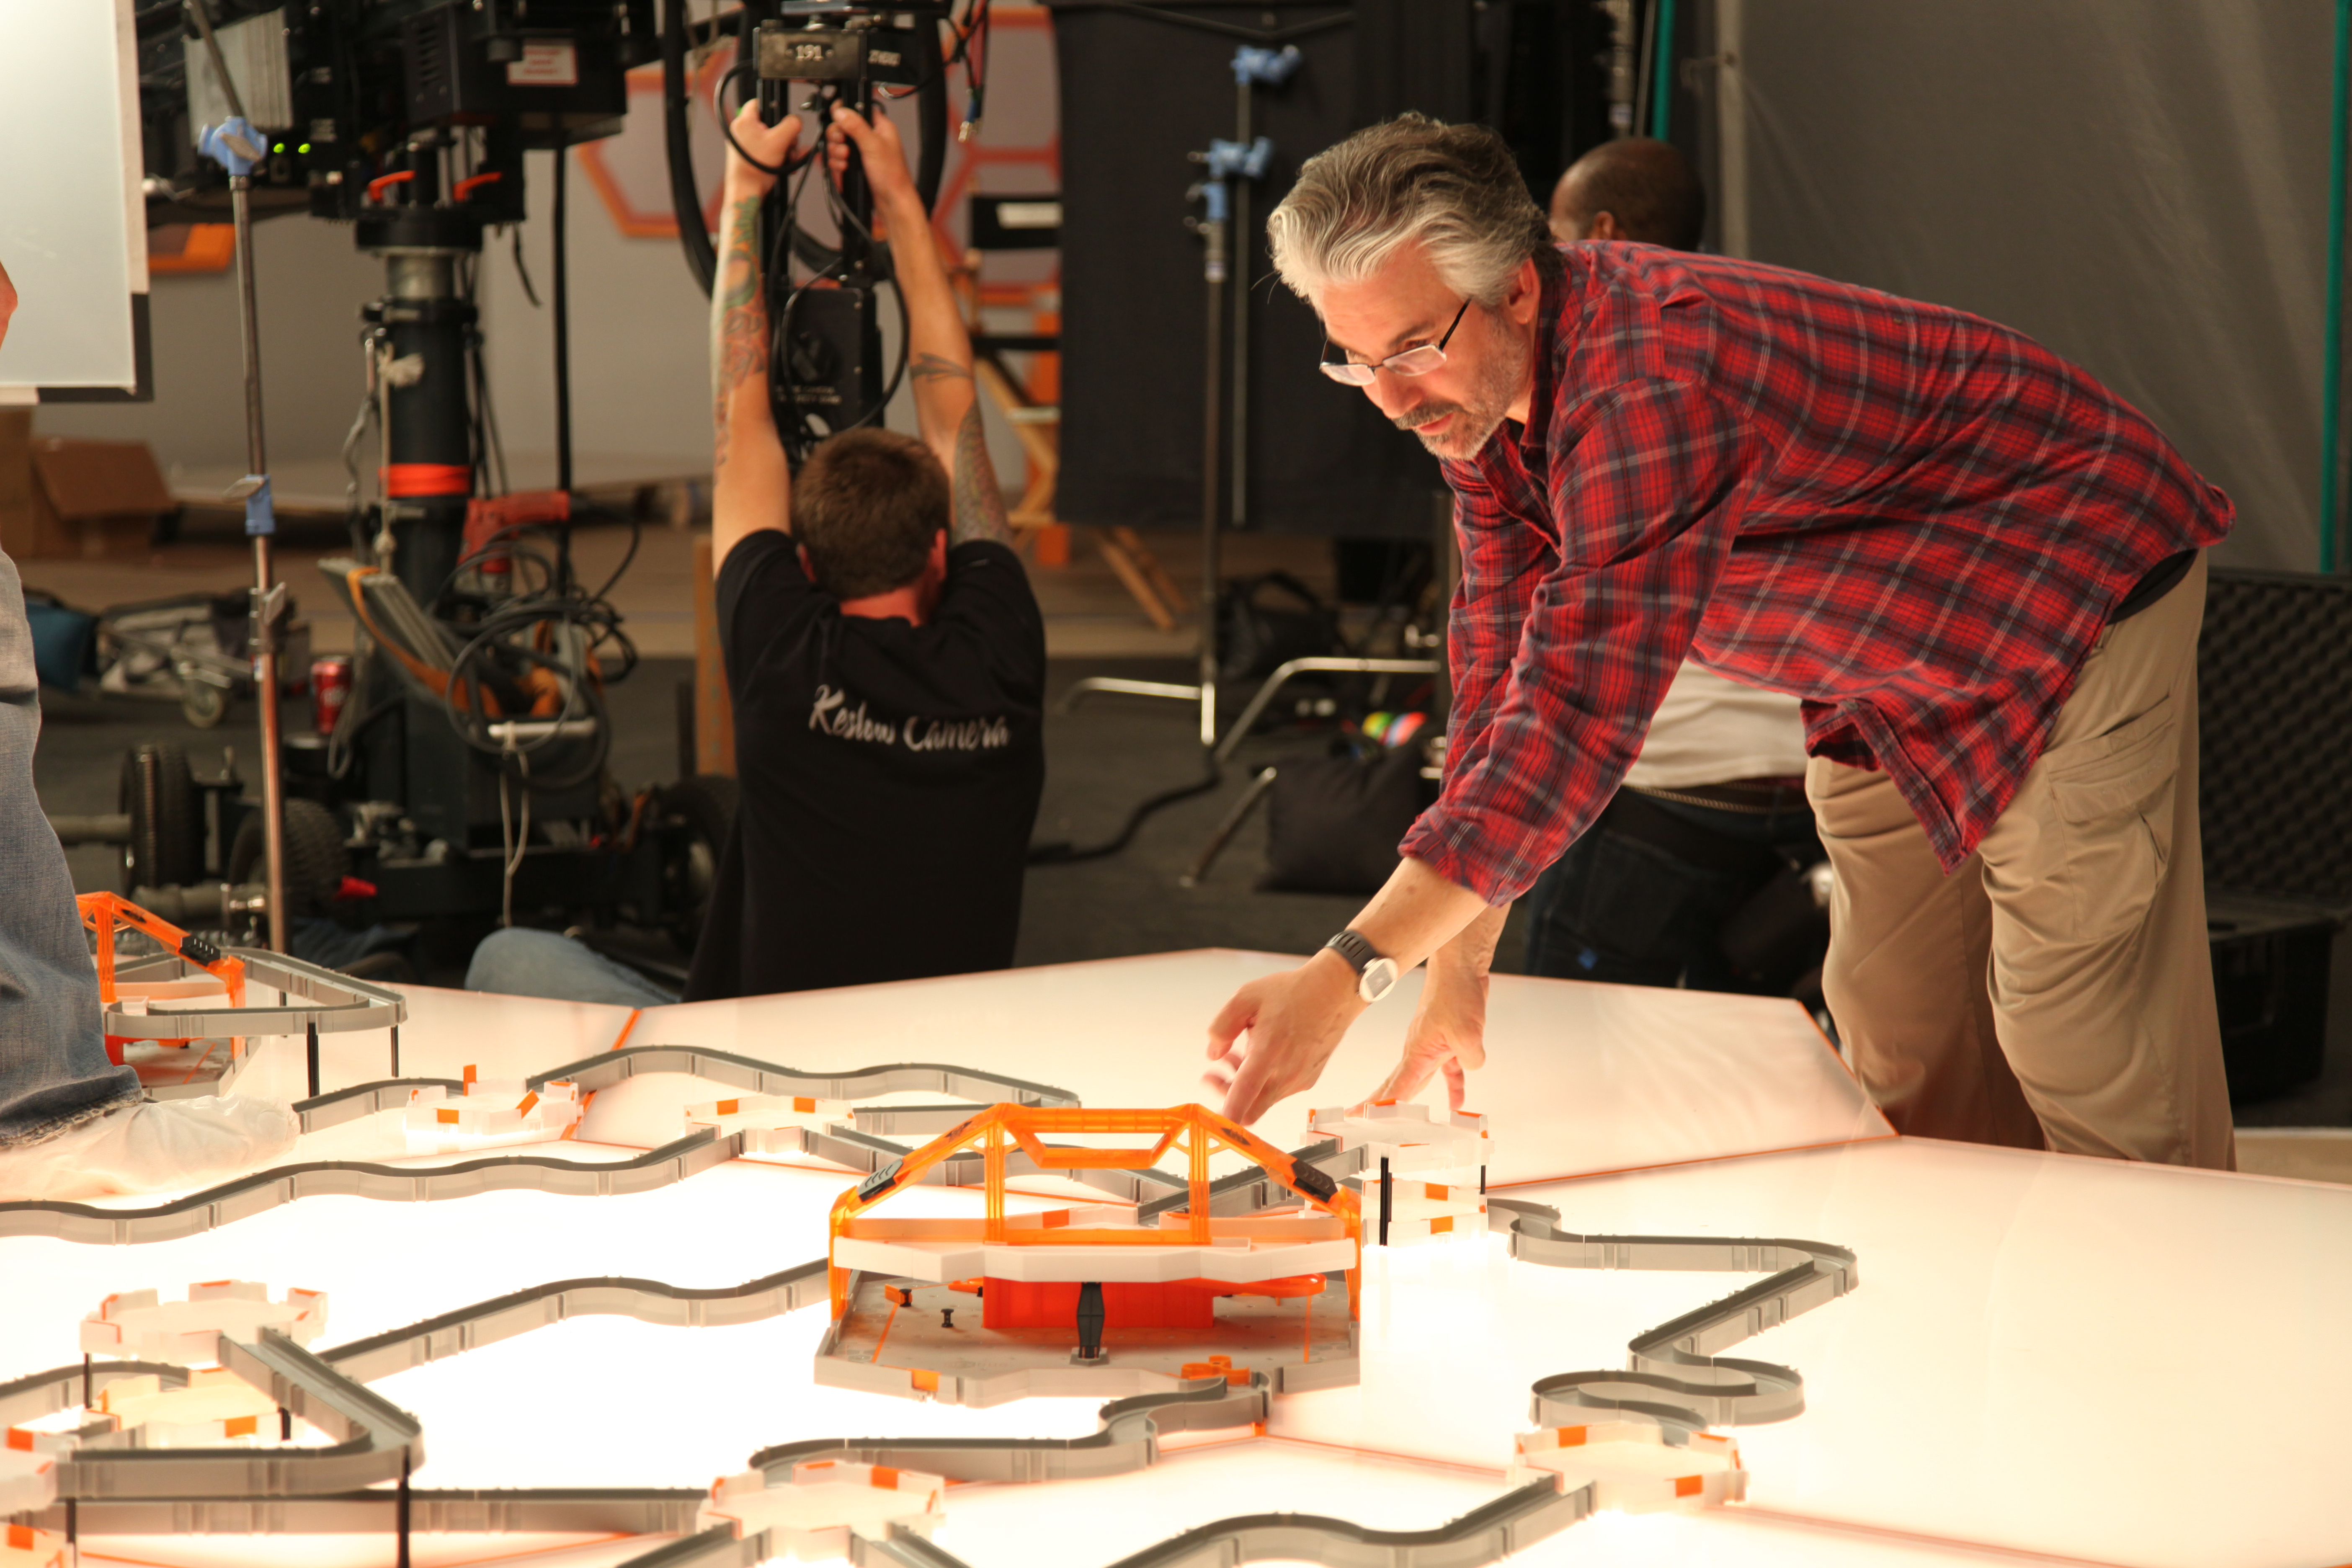 Paul Lazarus directs the Hexbug Hive Commercial campaign